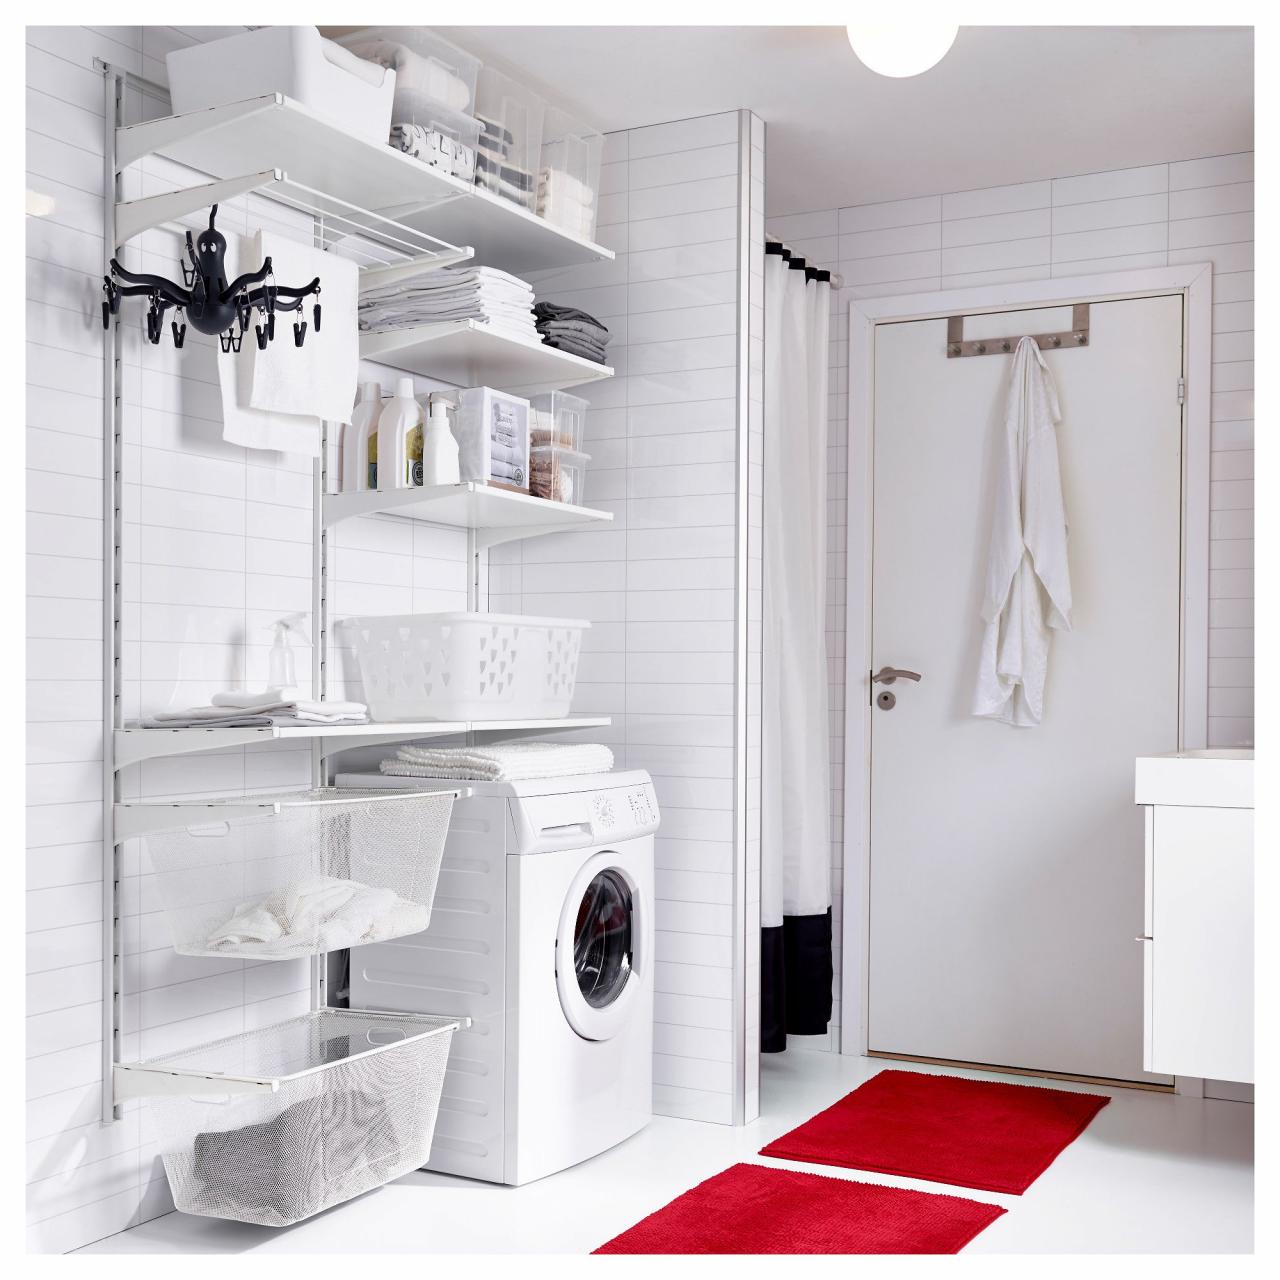 Minimalist Laundry Room Shelving Ikea for Small Space Home Interior